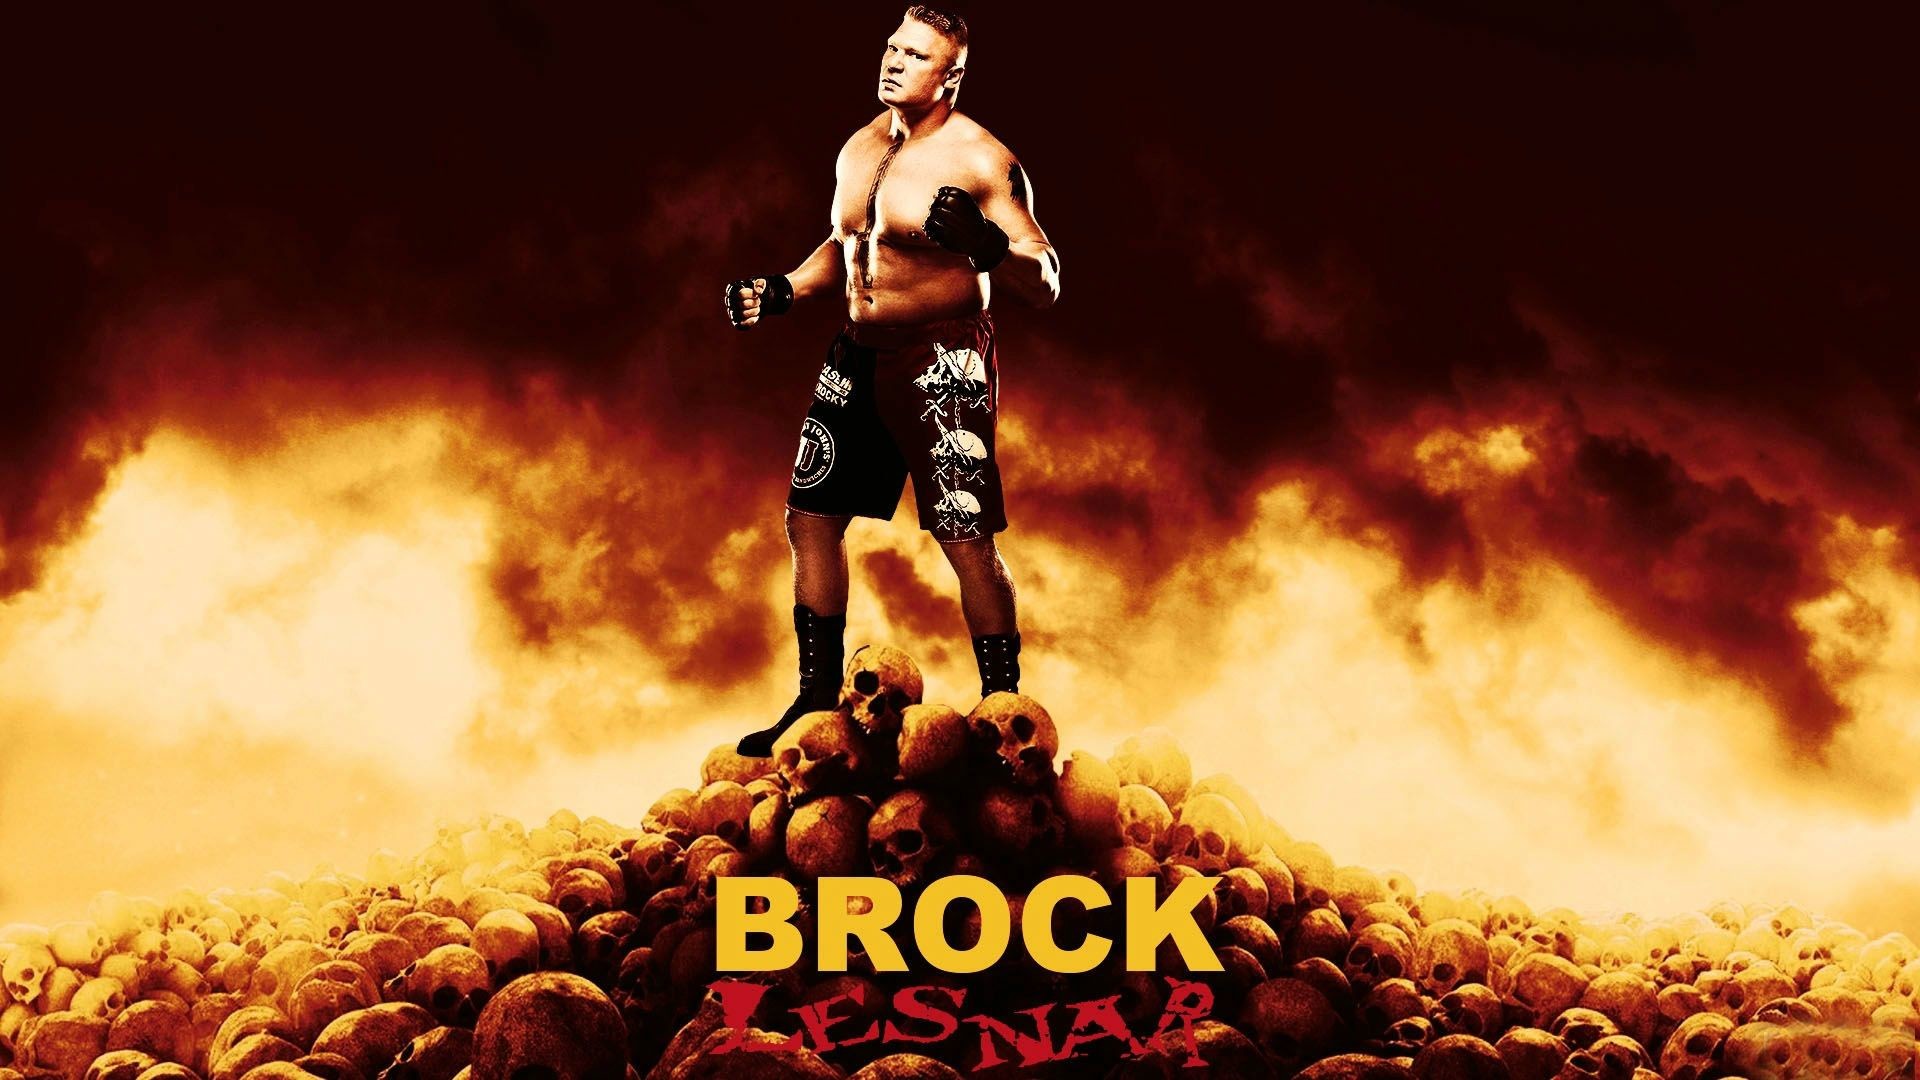 1920x1080 Brock Lesnar Pictures